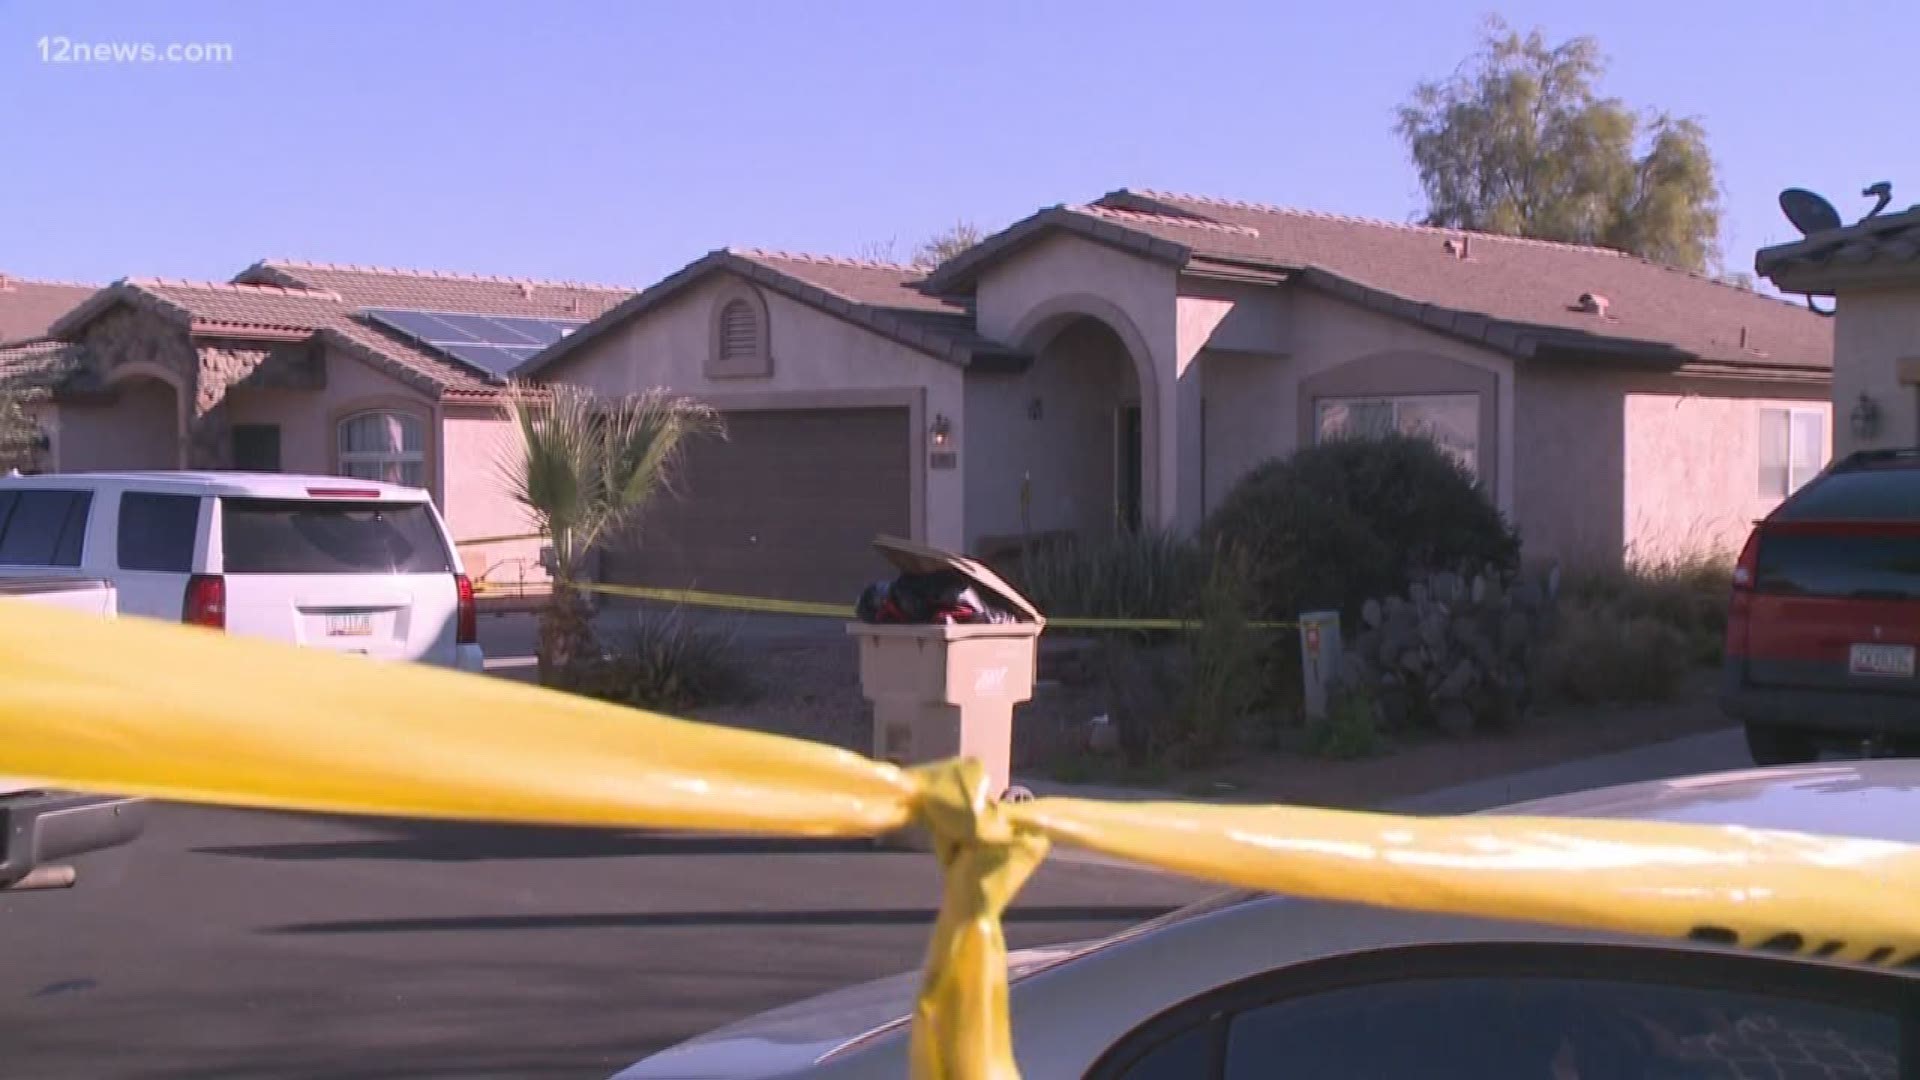 Buckeye police are searching for a murder suspect in the Valley. A woman in her 60s was found dead inside a home near Ash Ave. and Redwood Ln. Police believe the suspect and the victim knew each other.